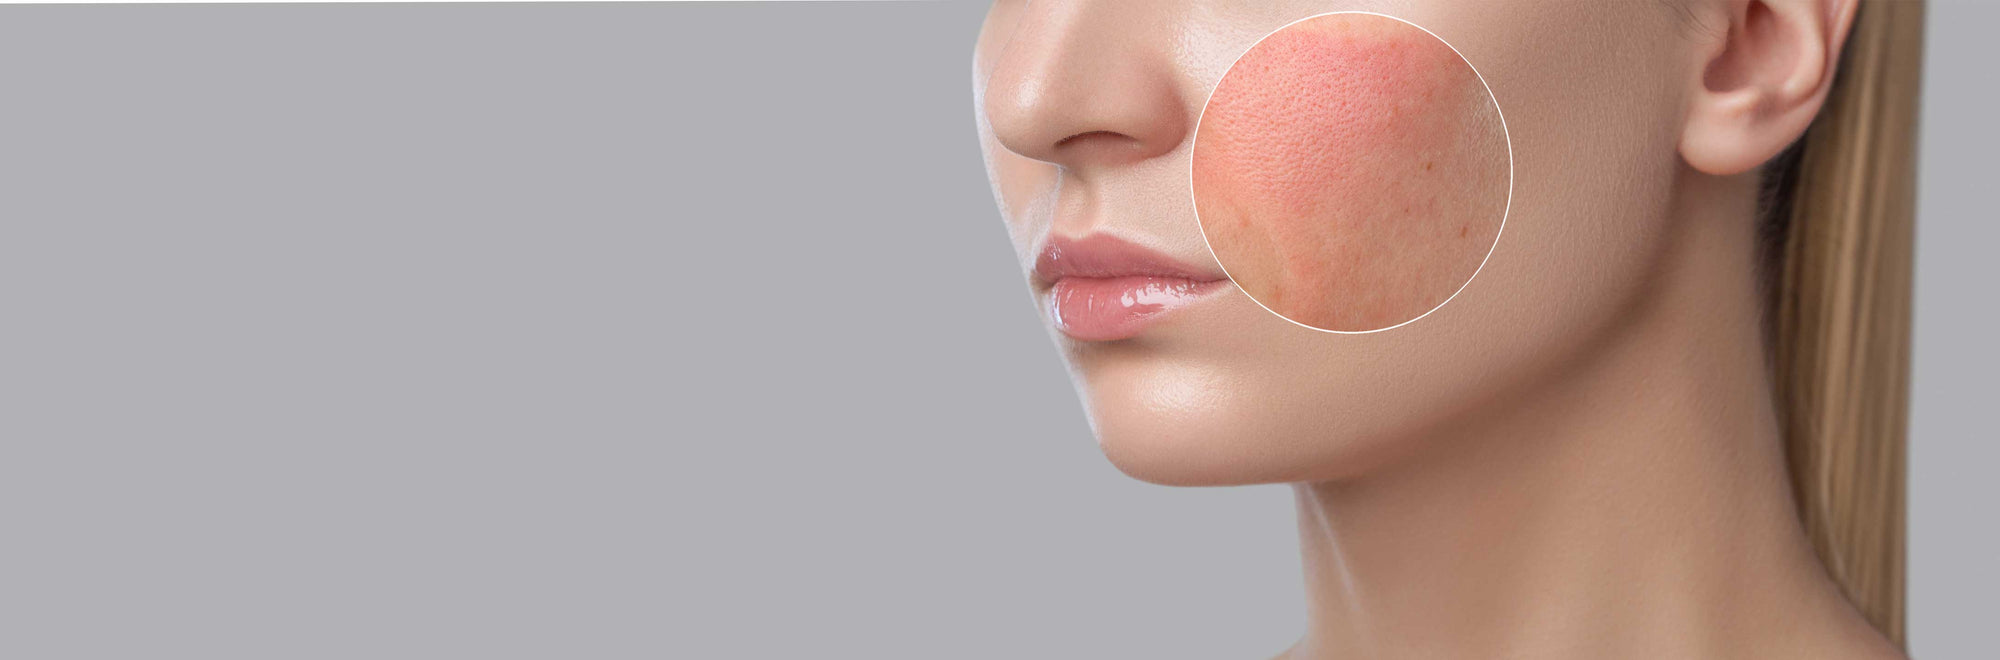 Rosacea: Tips to minimise flare-ups and soothe your skin.